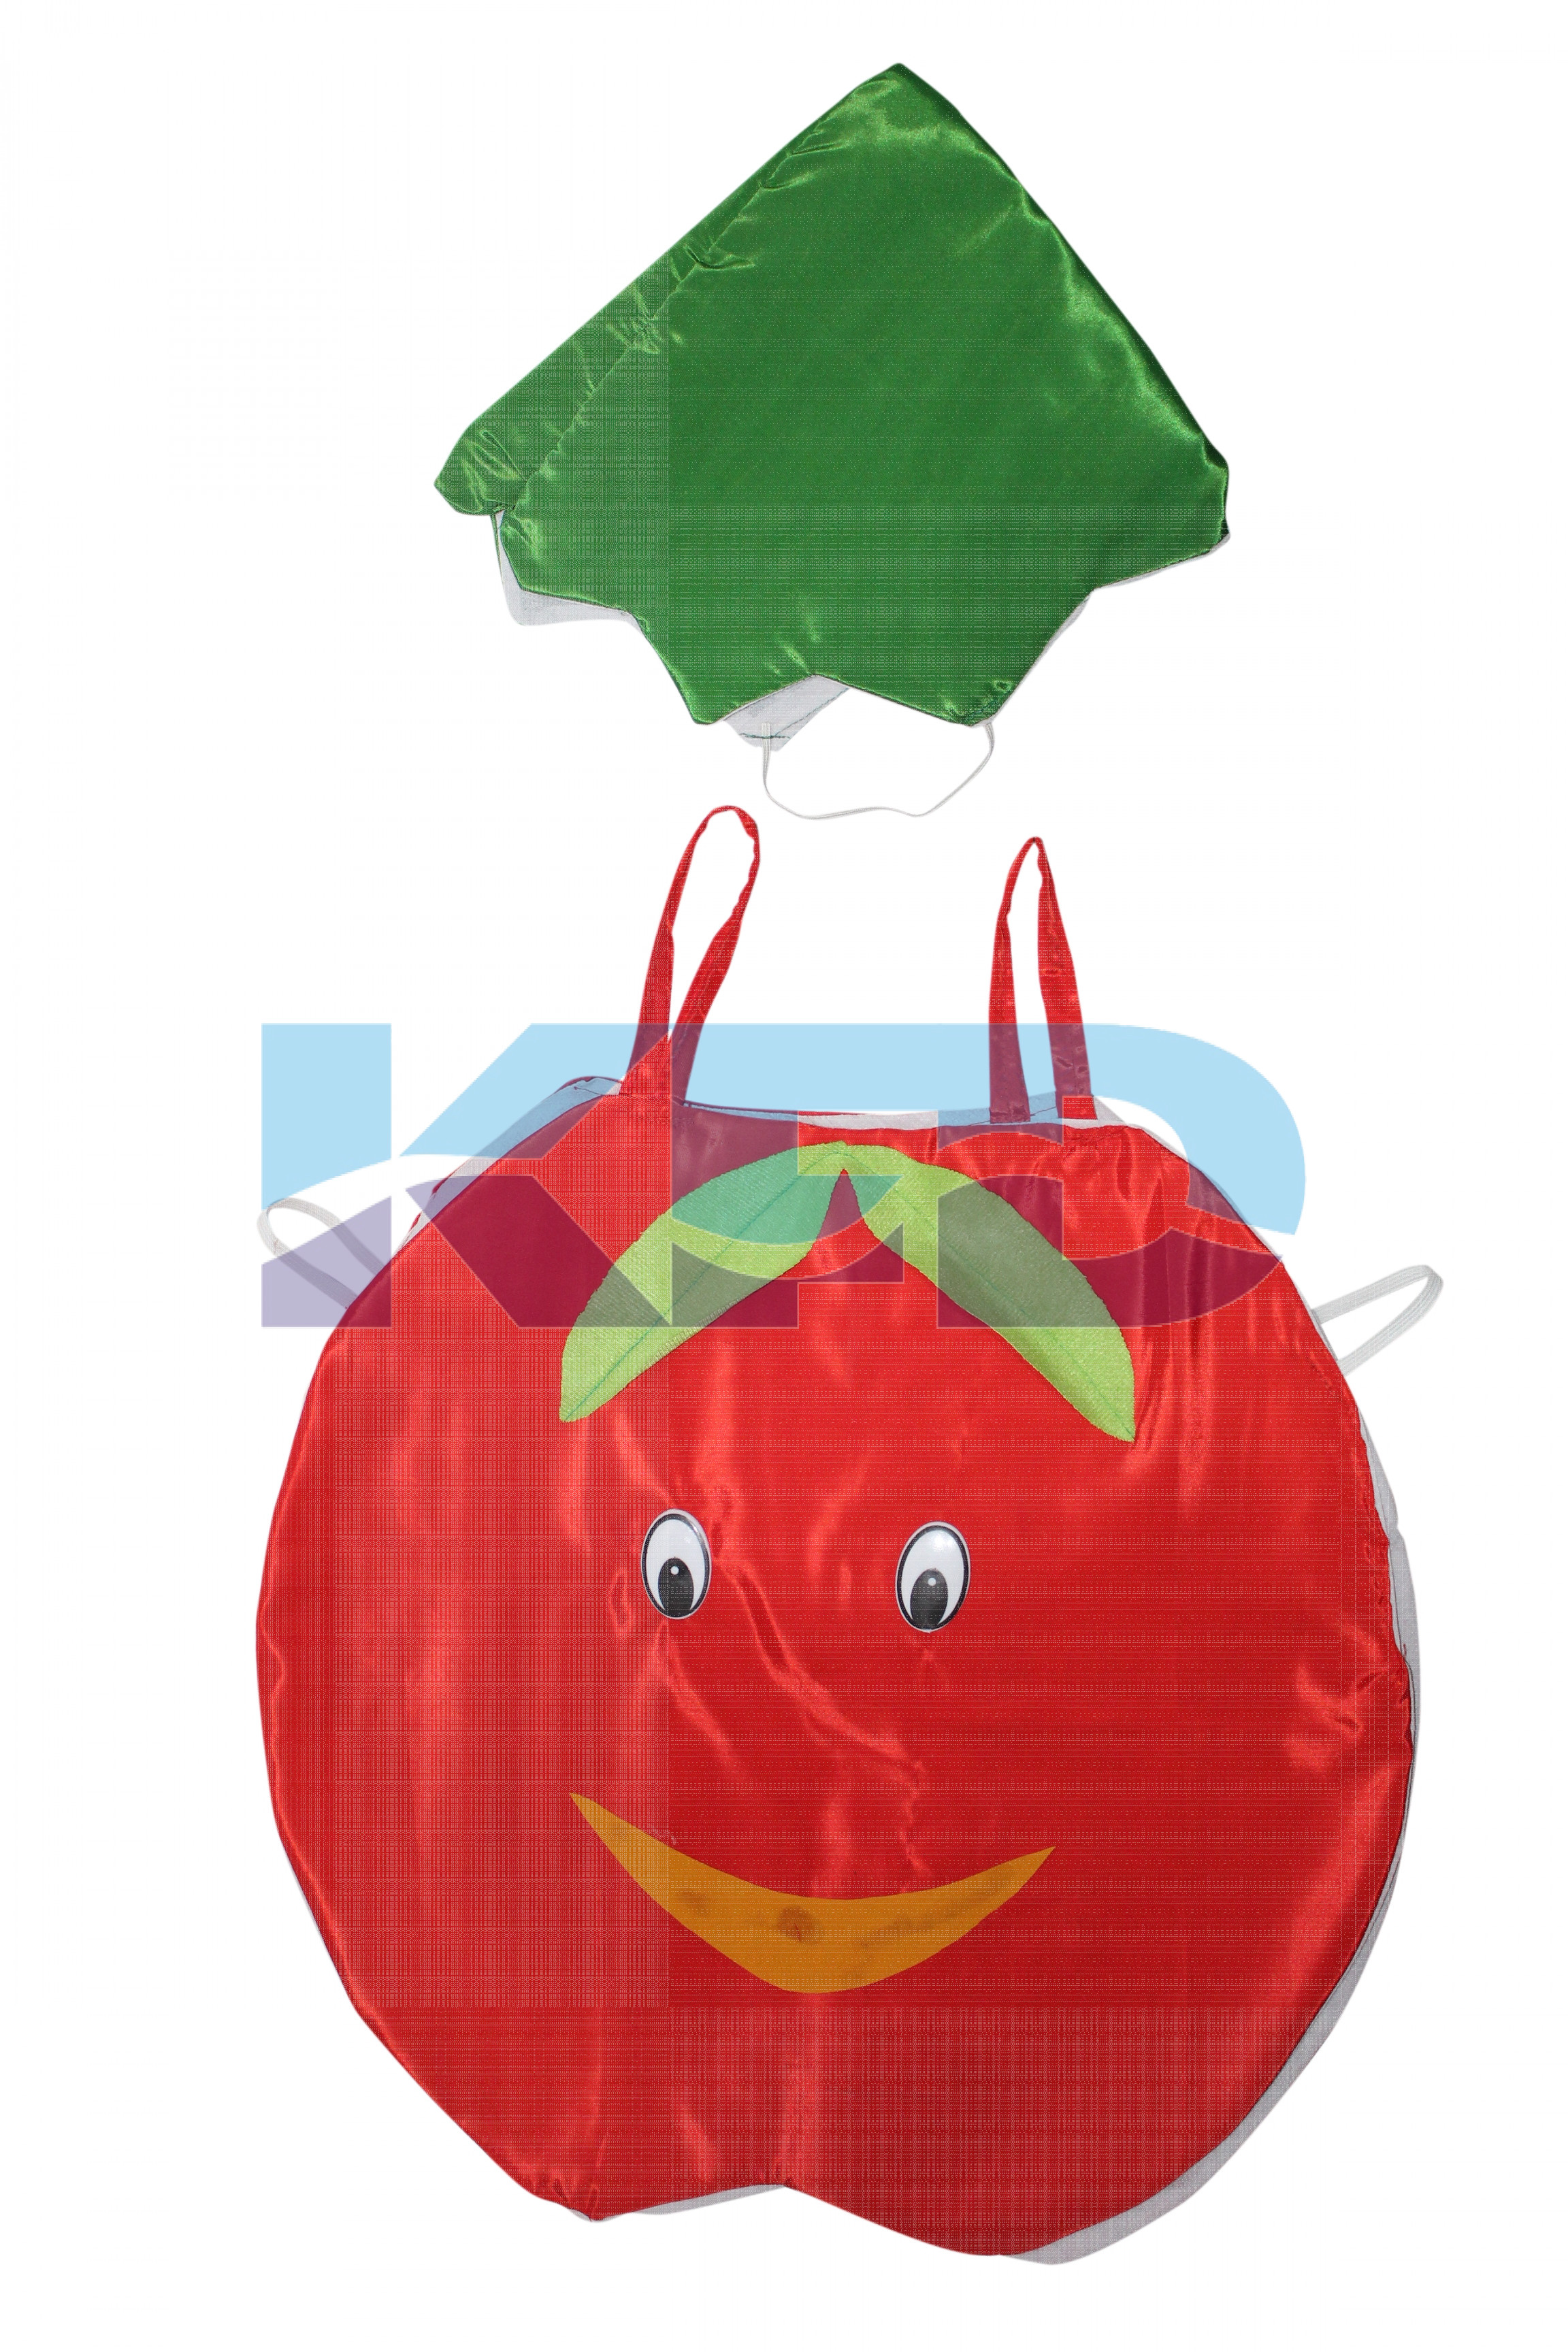  Apple Fruits Costume only cutout with Cap for Annual function/Theme Party/Competition/Stage Shows/Birthday Party Dress